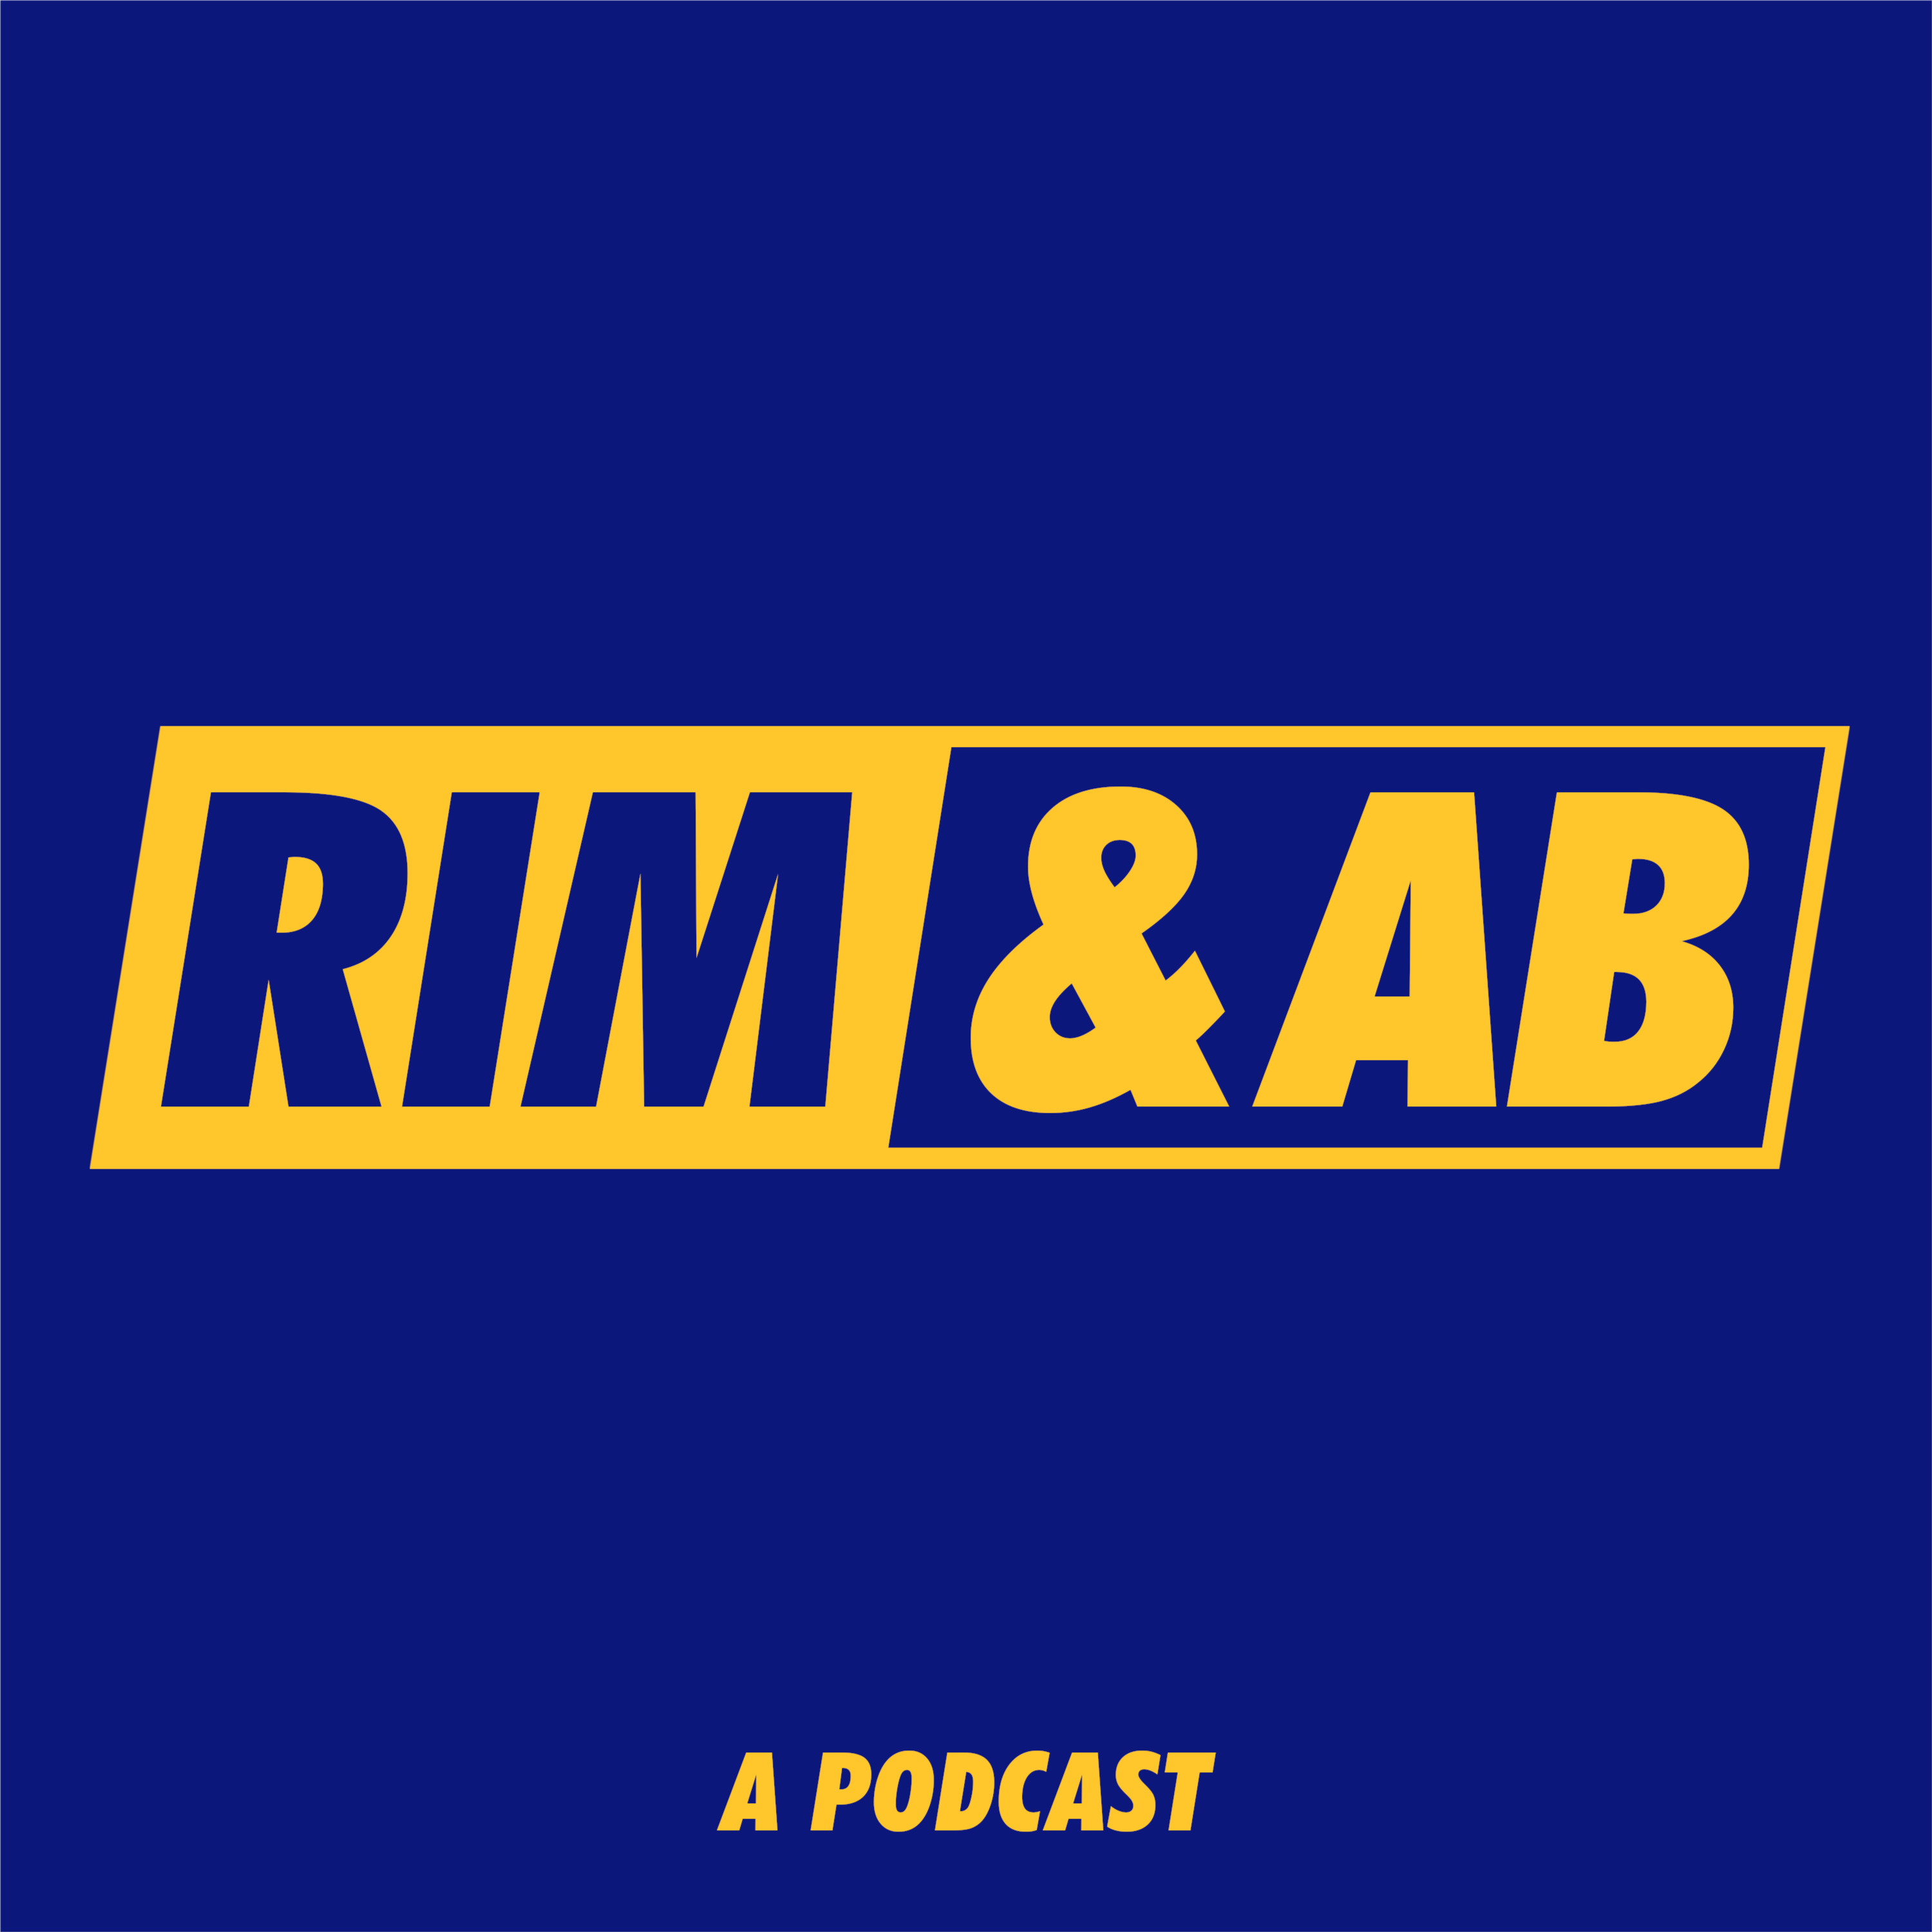 Introducing 'More Rim and AB!' -- available on Patreon